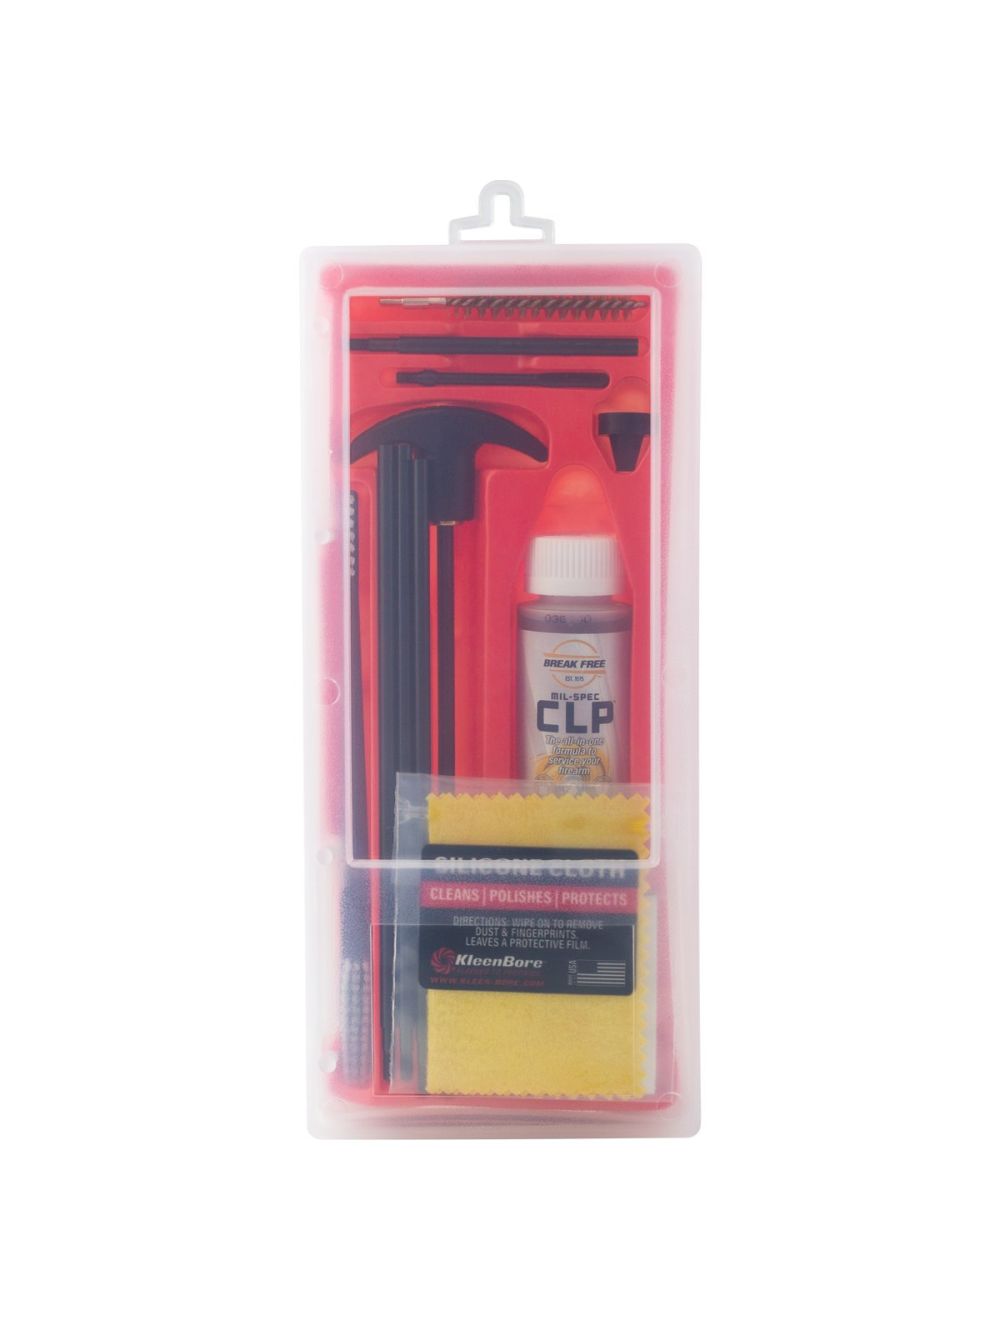 9mm/.35 Cal. Rifle Cleaning Kit